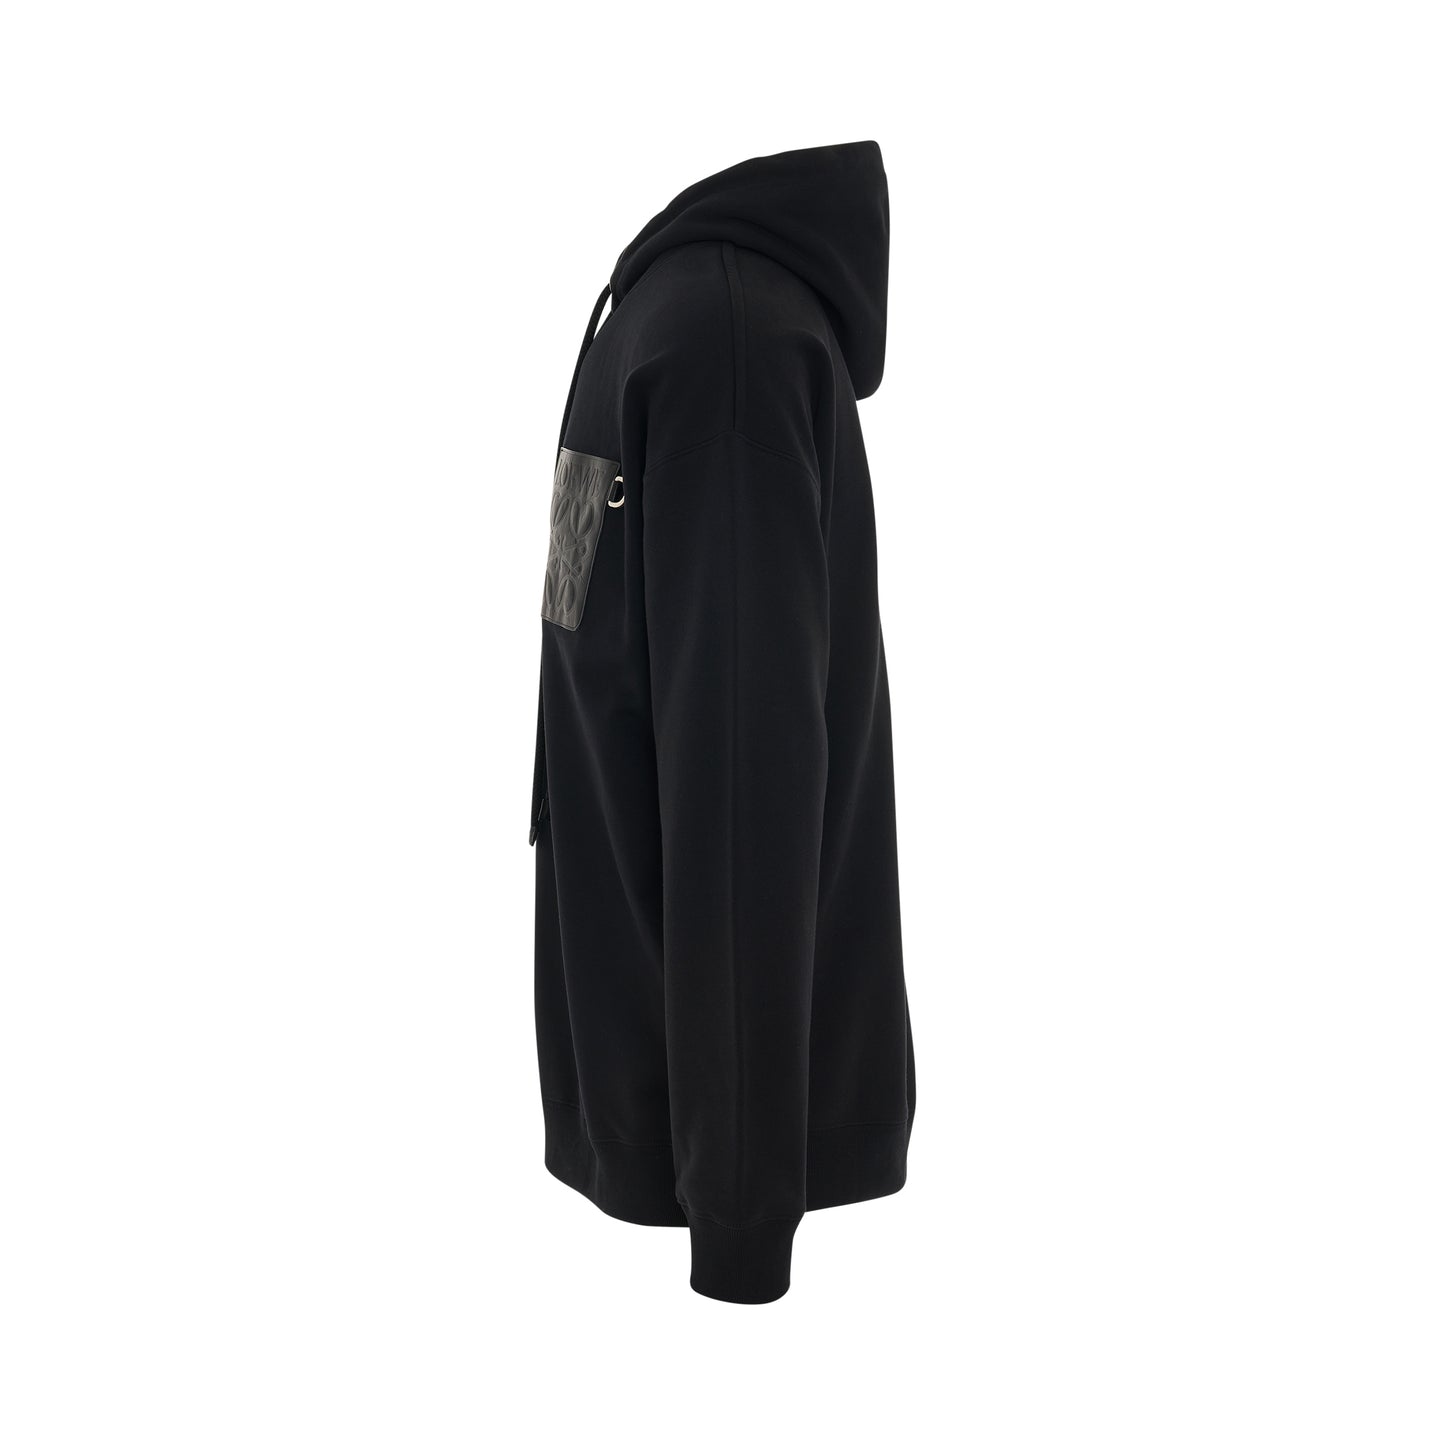 Anagram Leather Patch Cotton Hoodie in Black